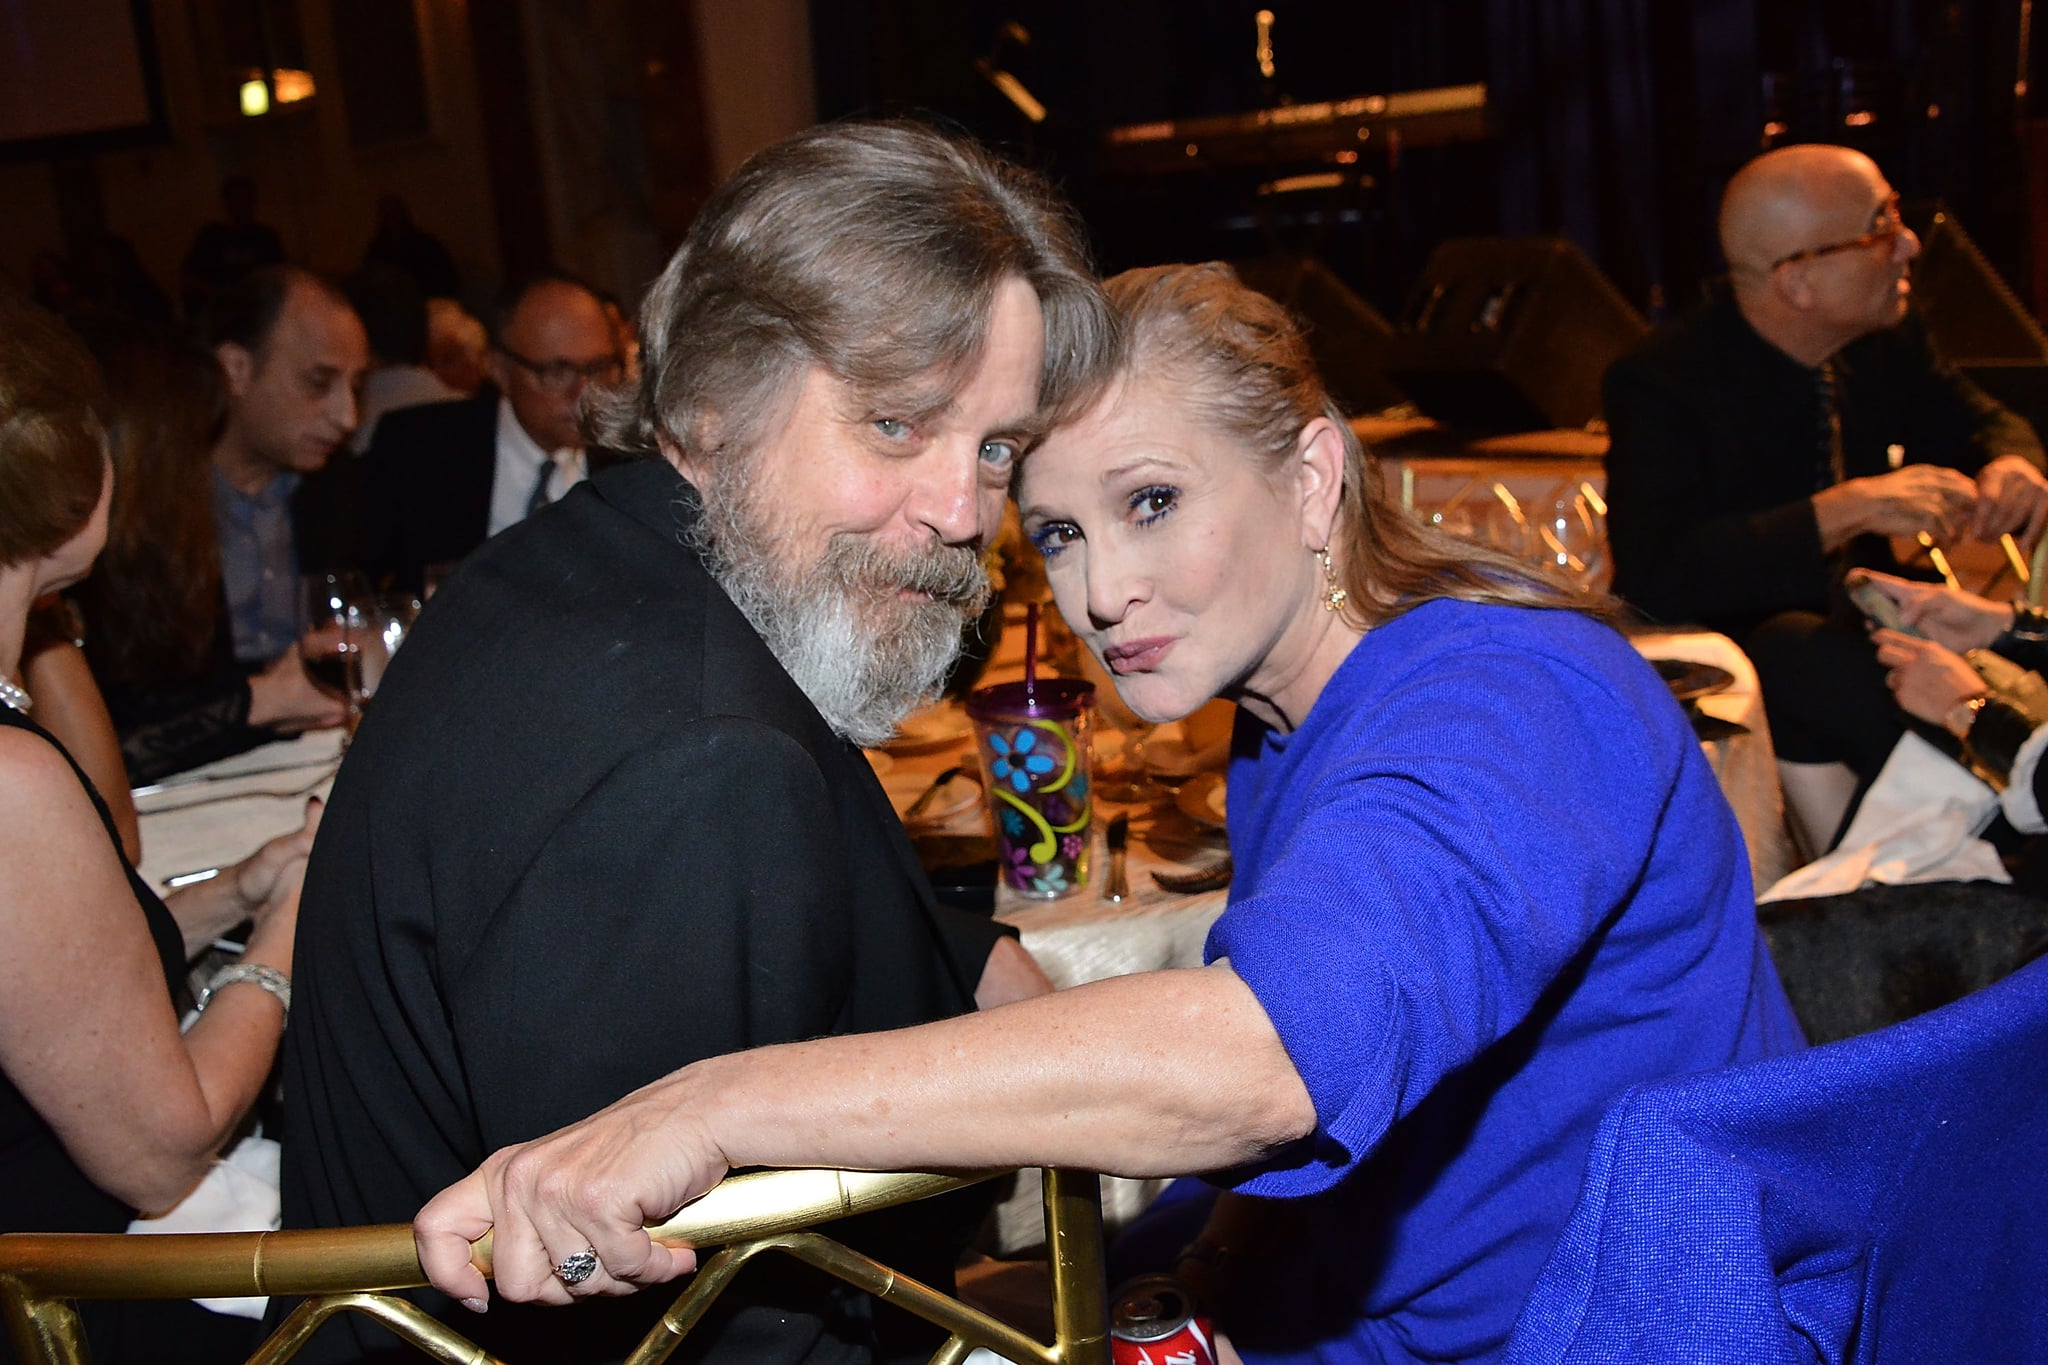 BEVERLY HILLS, CA - SEPTEMBER 30:  Mark Hamill and Carrie Fisher attend the Midnight Mission's 100 year anniversary Golden Heart Gala held at the Beverly Wilshire Four Seasons Hotel on September 30, 2014 in Beverly Hills, California.  (Photo by Araya Diaz/Getty Images for The Midnight Mission)